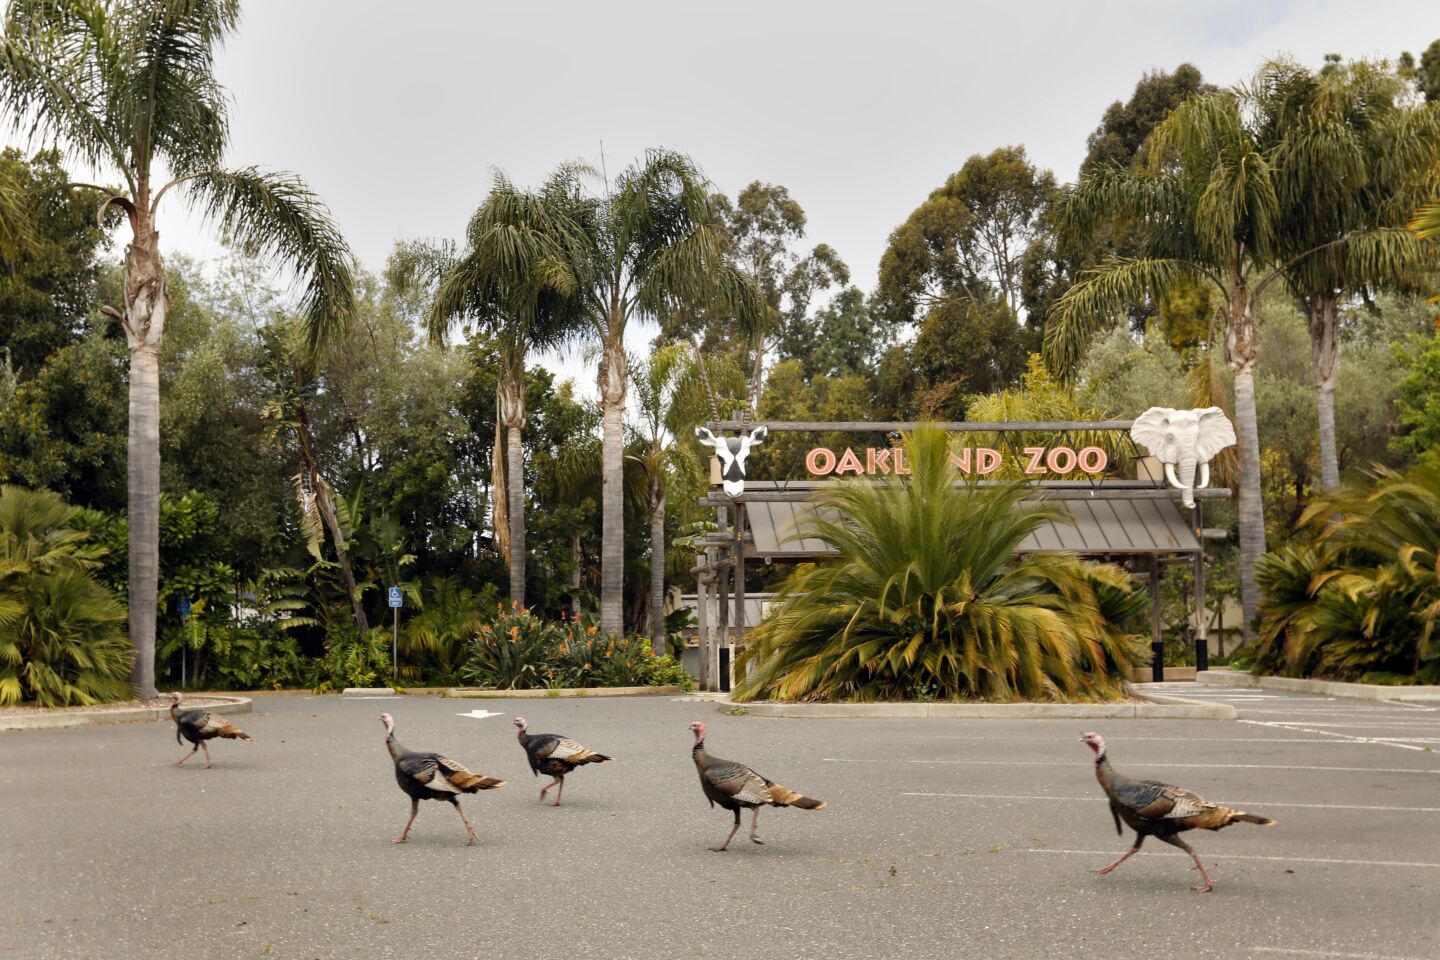 Wild turkeys wander through the parking lot of the Oakland Zoo on April 20, 2020. The Oakland Zoo is closed due to the coronavirus, leaving the zoo without ticket sales. The costs of feeding